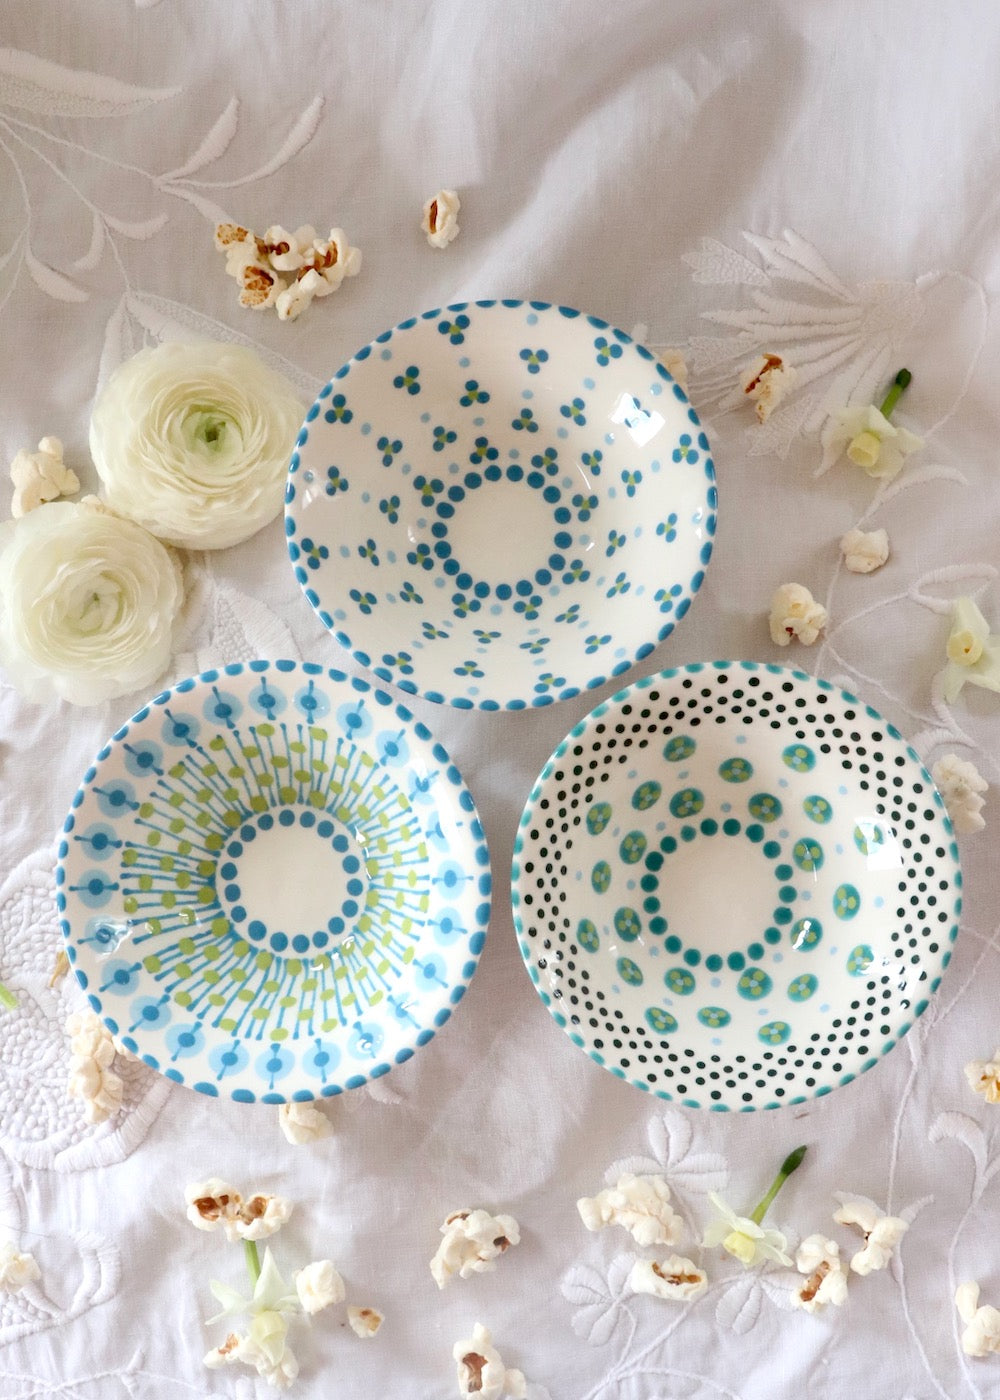 NEW IN: Nut Bowl - SET of 3 White & Teal